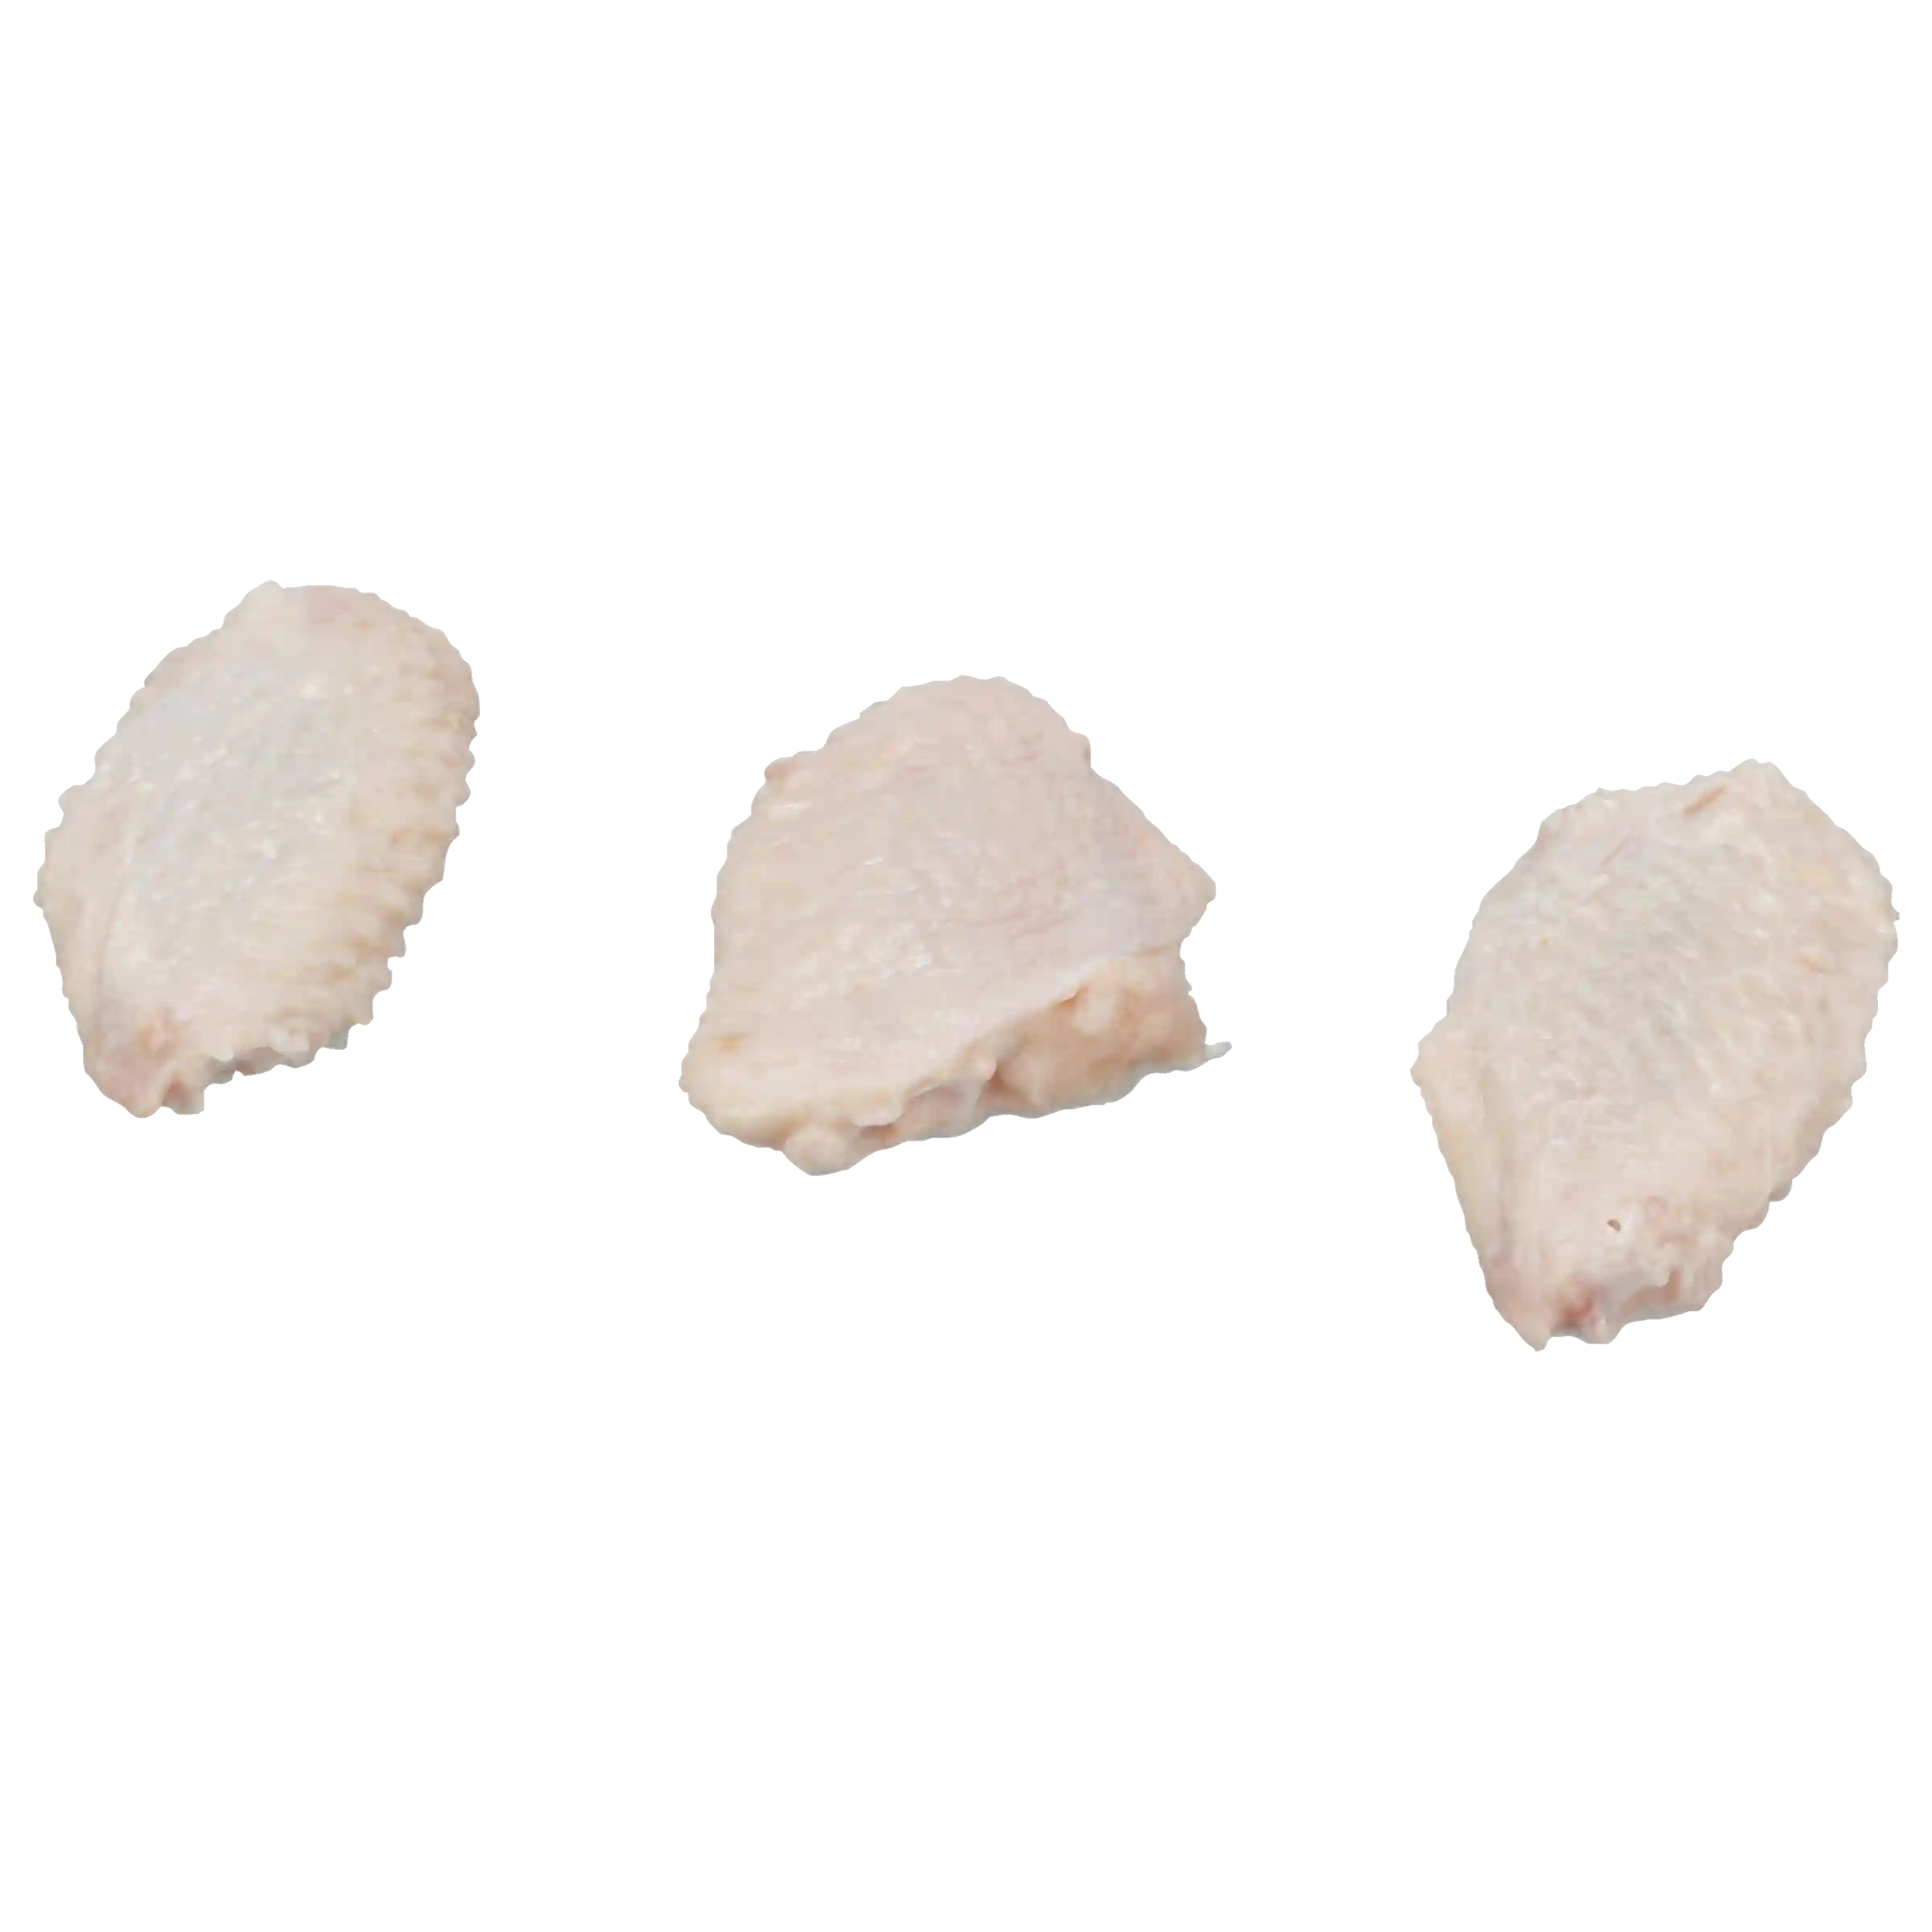 Tyson® IF Coated Bone-In Chicken Wing Sections, Jumbo_image_11